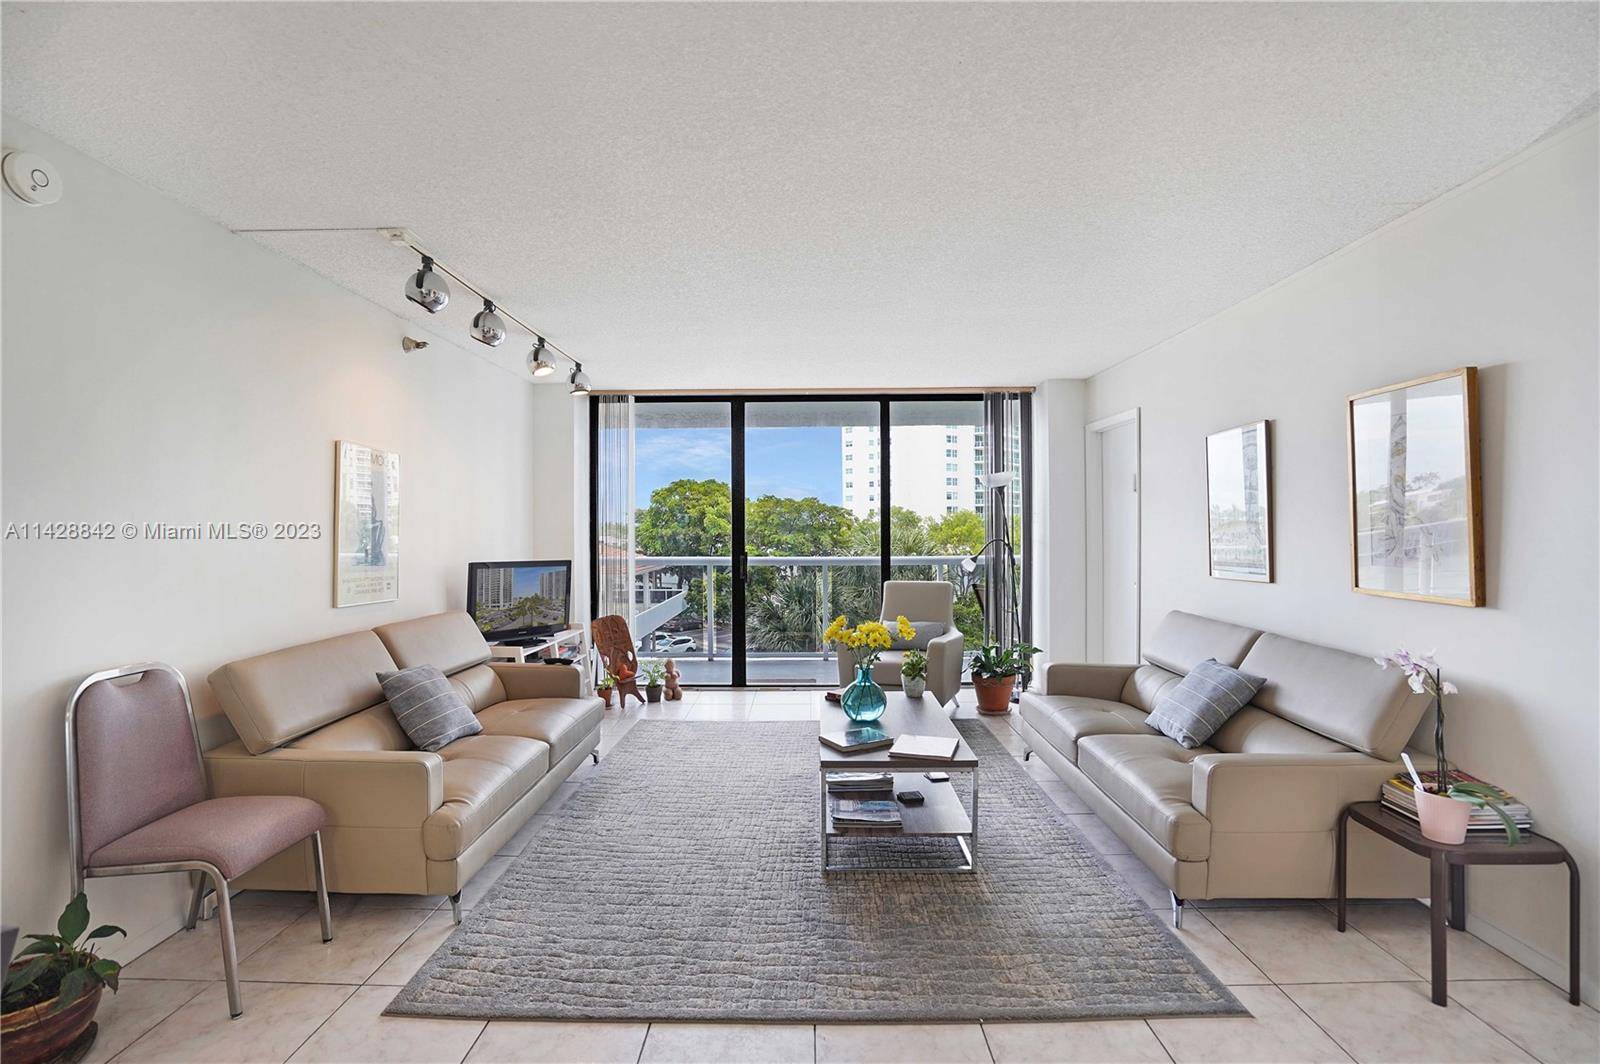 CAN BE LEASED RIGHT AWAY Unique three bedrooms three bathrooms condo located in the heart of Aventura along the exclusive Country Club Drive and across the Turnberry Golf Course.